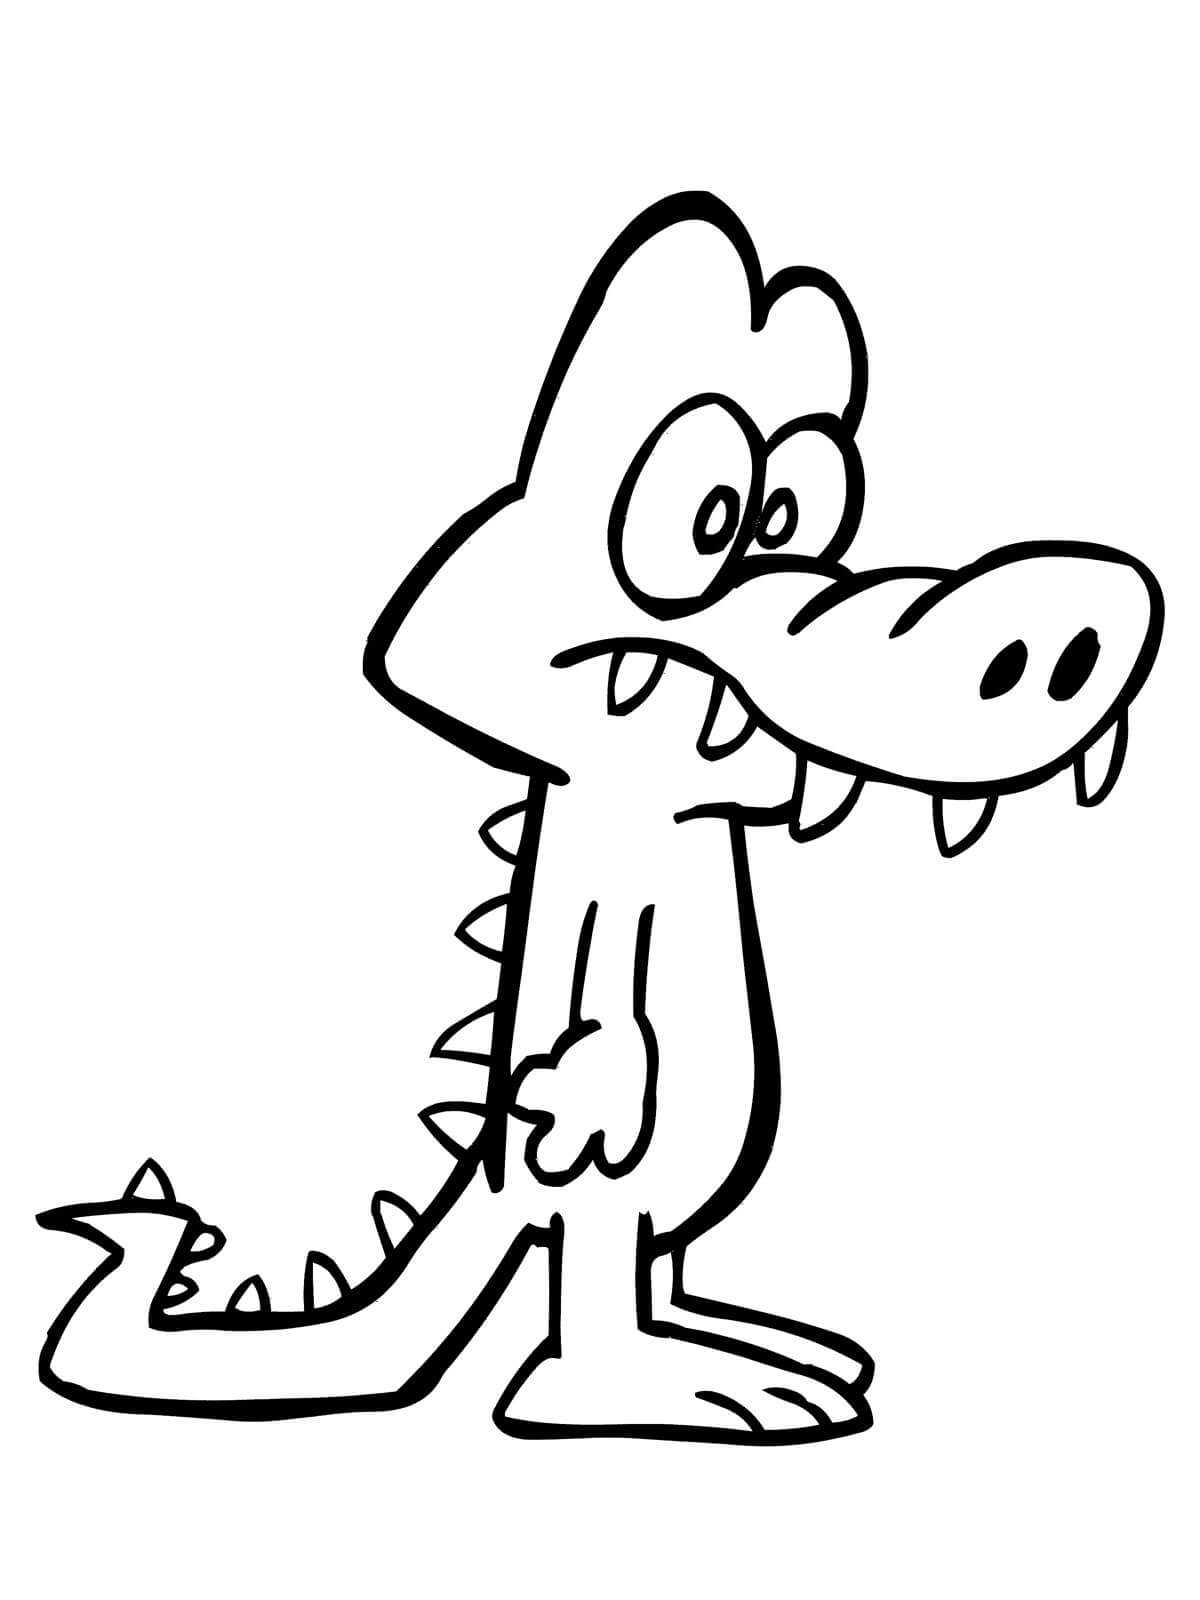 Cute Alligator Coloring Pages for Kids